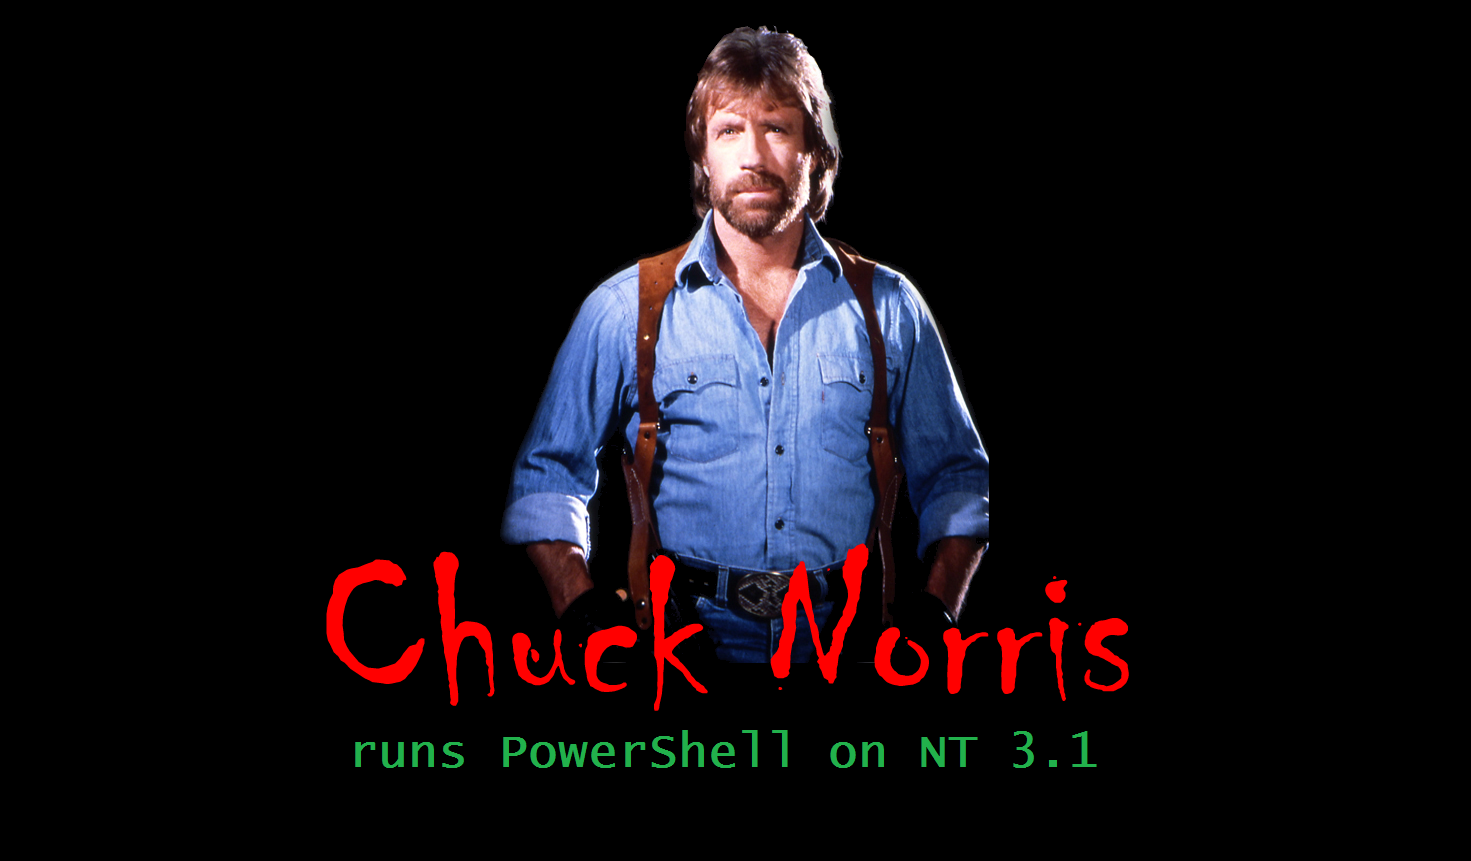 New Amp Improved Formula Powershell And Chuck Norris